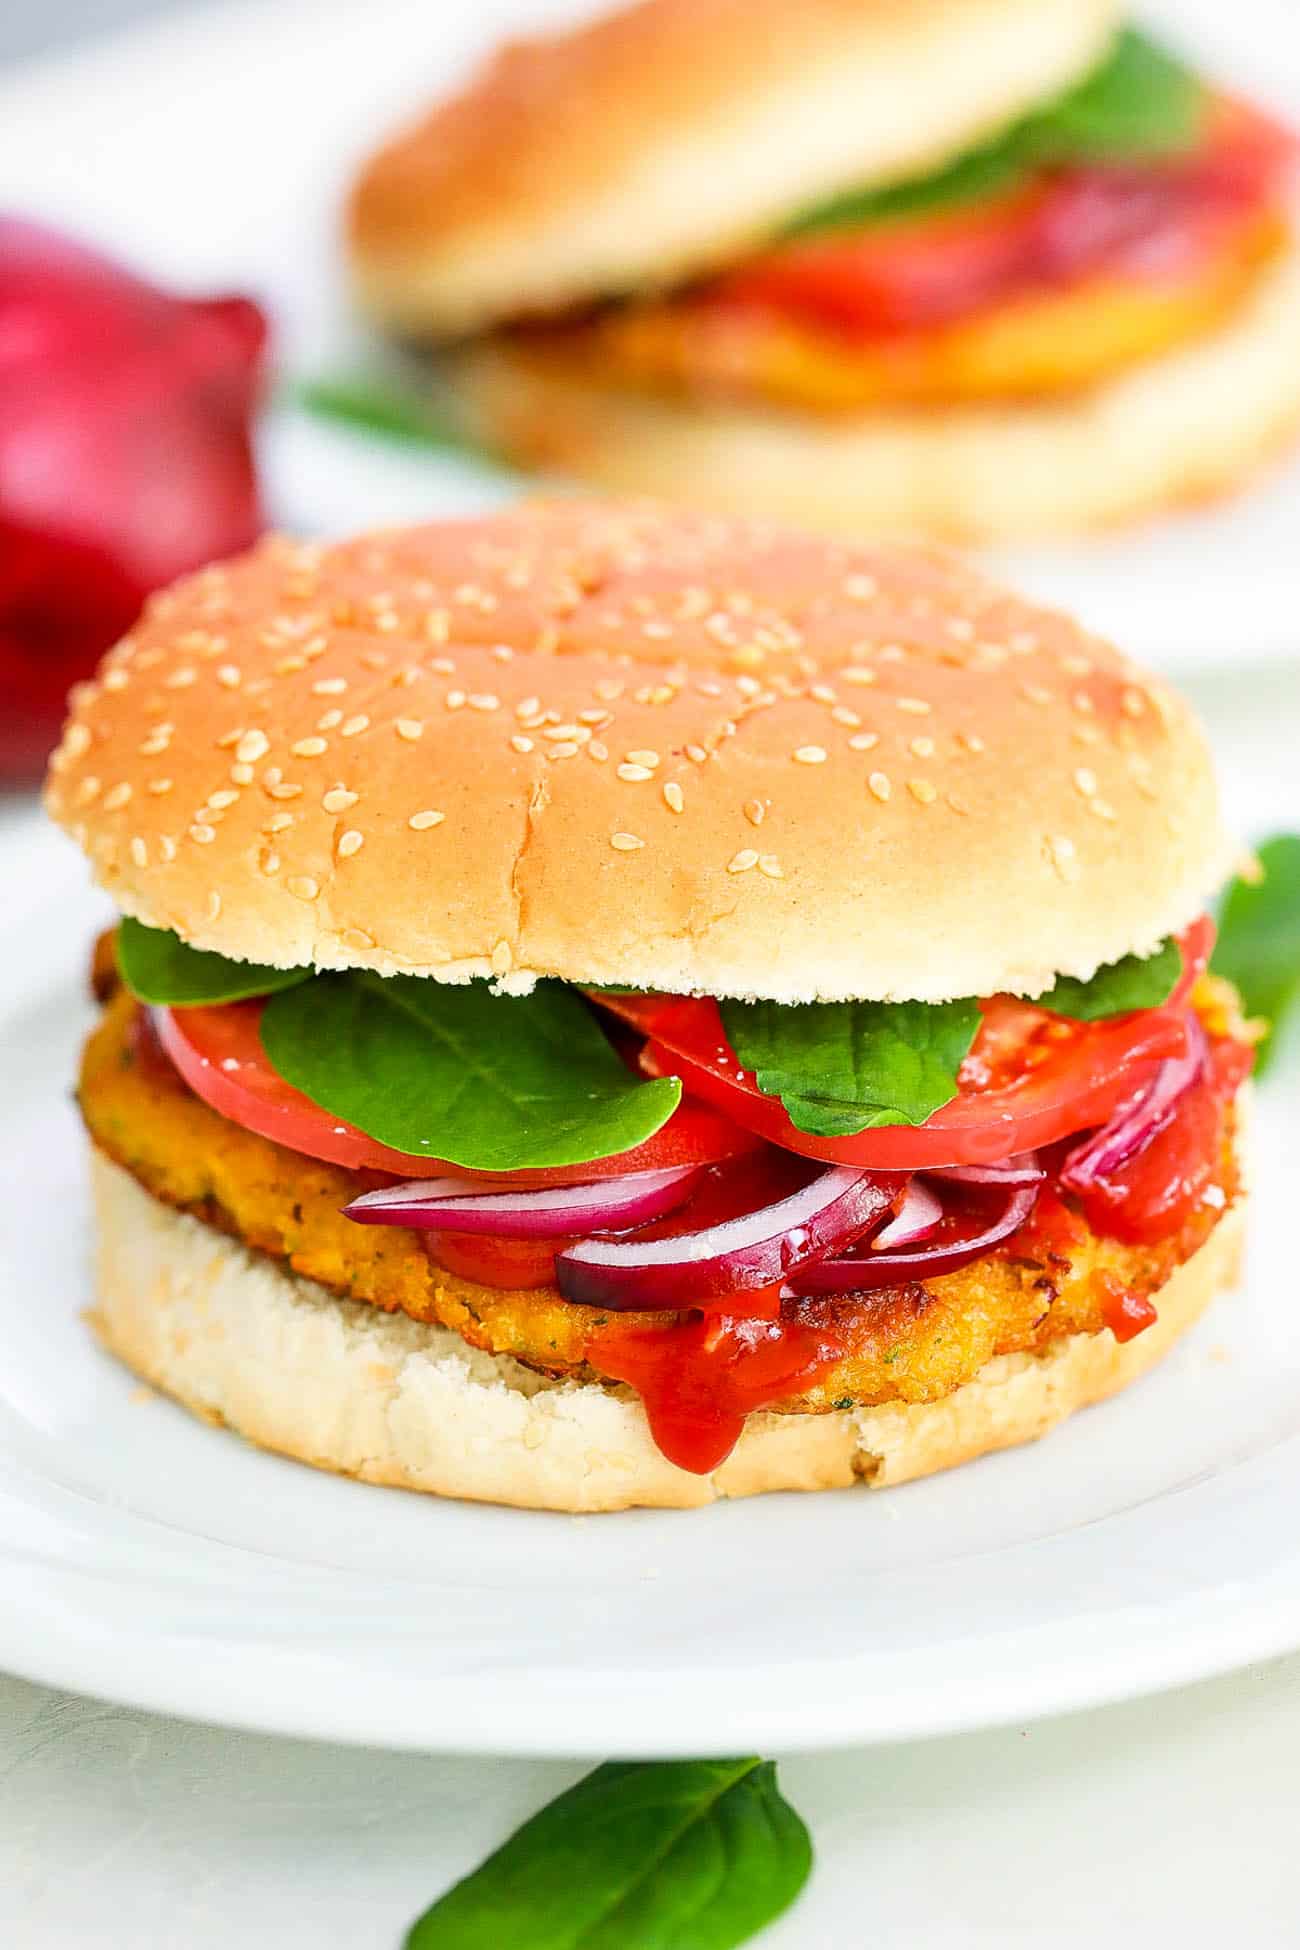 pinto bean burgers with spinach, tomato, and red onion - a classic vegetarian 4th of July recipes